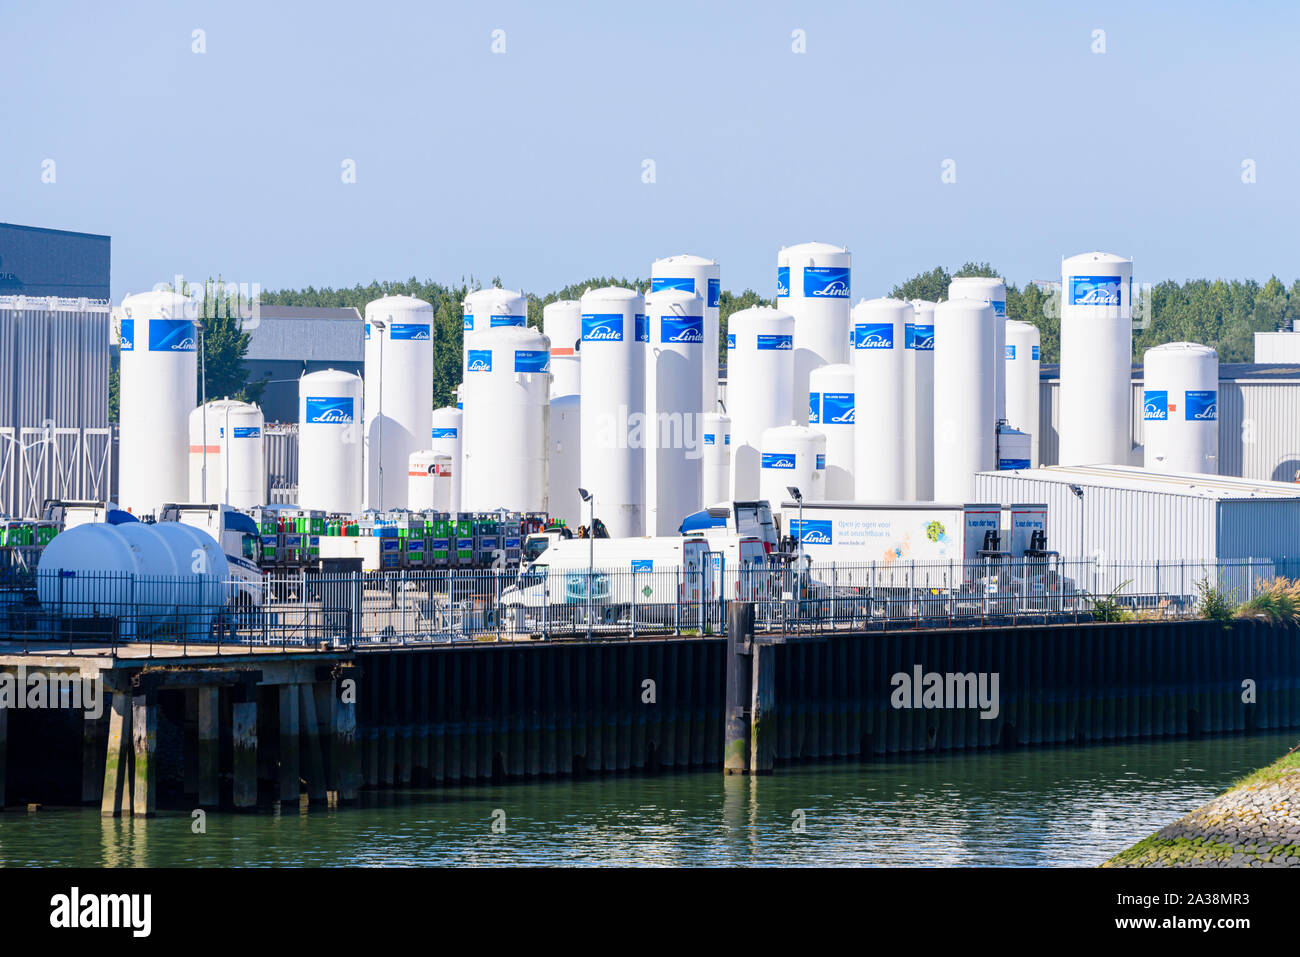 Industrial gas storage tanks from world's largest supplier of industrial gases, Linde, Rotterdam, Netherlands. Stock Photo